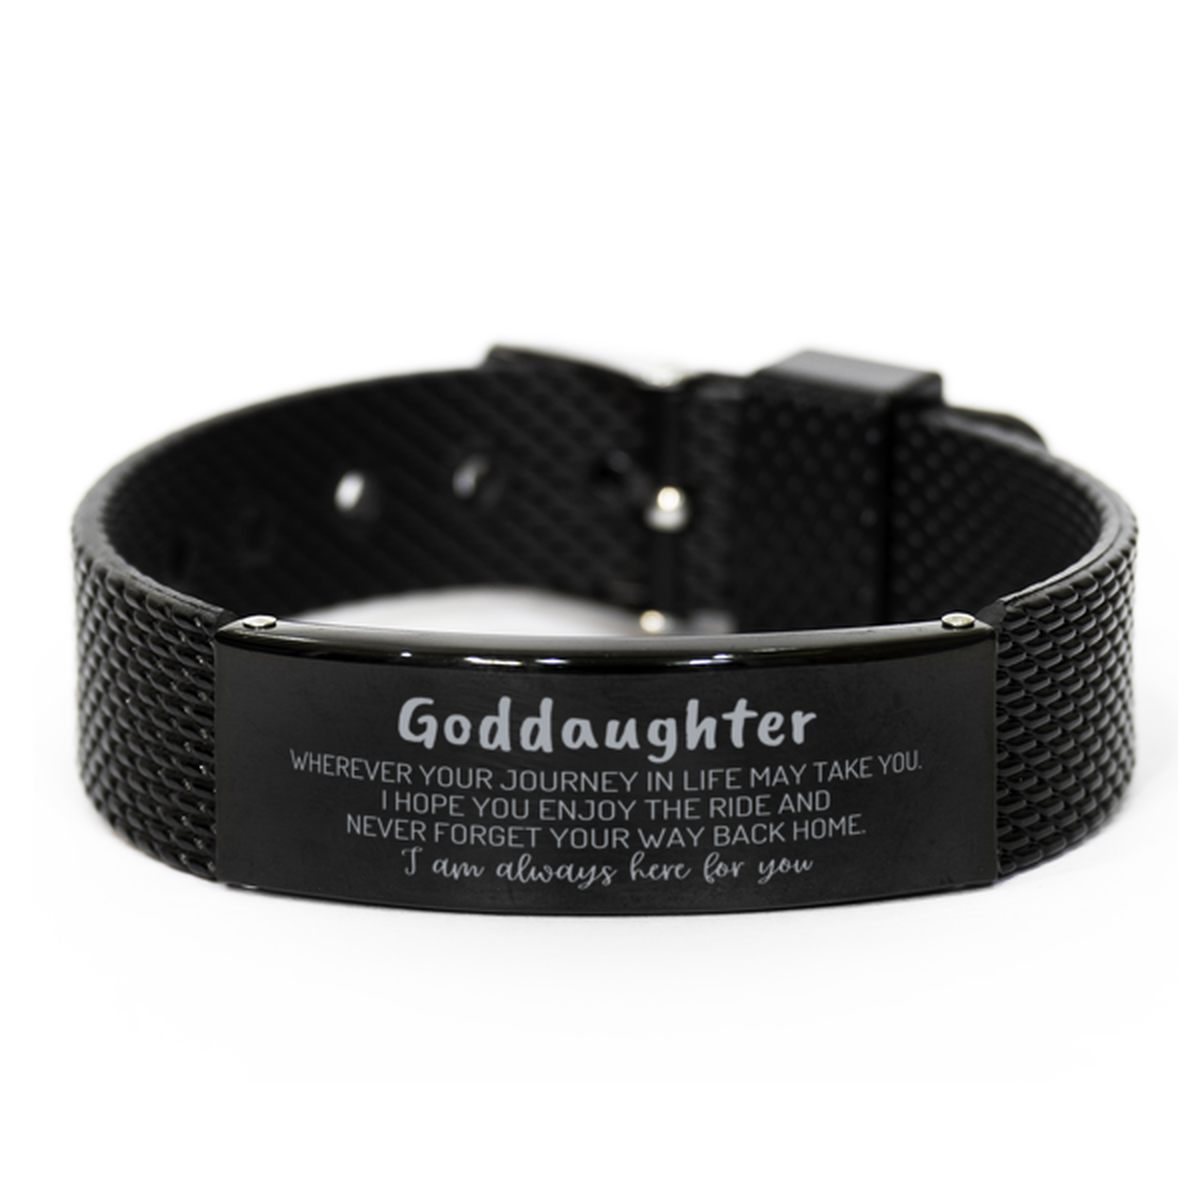 Goddaughter wherever your journey in life may take you, I am always here for you Goddaughter Black Shark Mesh Bracelet, Awesome Christmas Gifts For Goddaughter, Goddaughter Birthday Gifts for Men Women Family Loved One